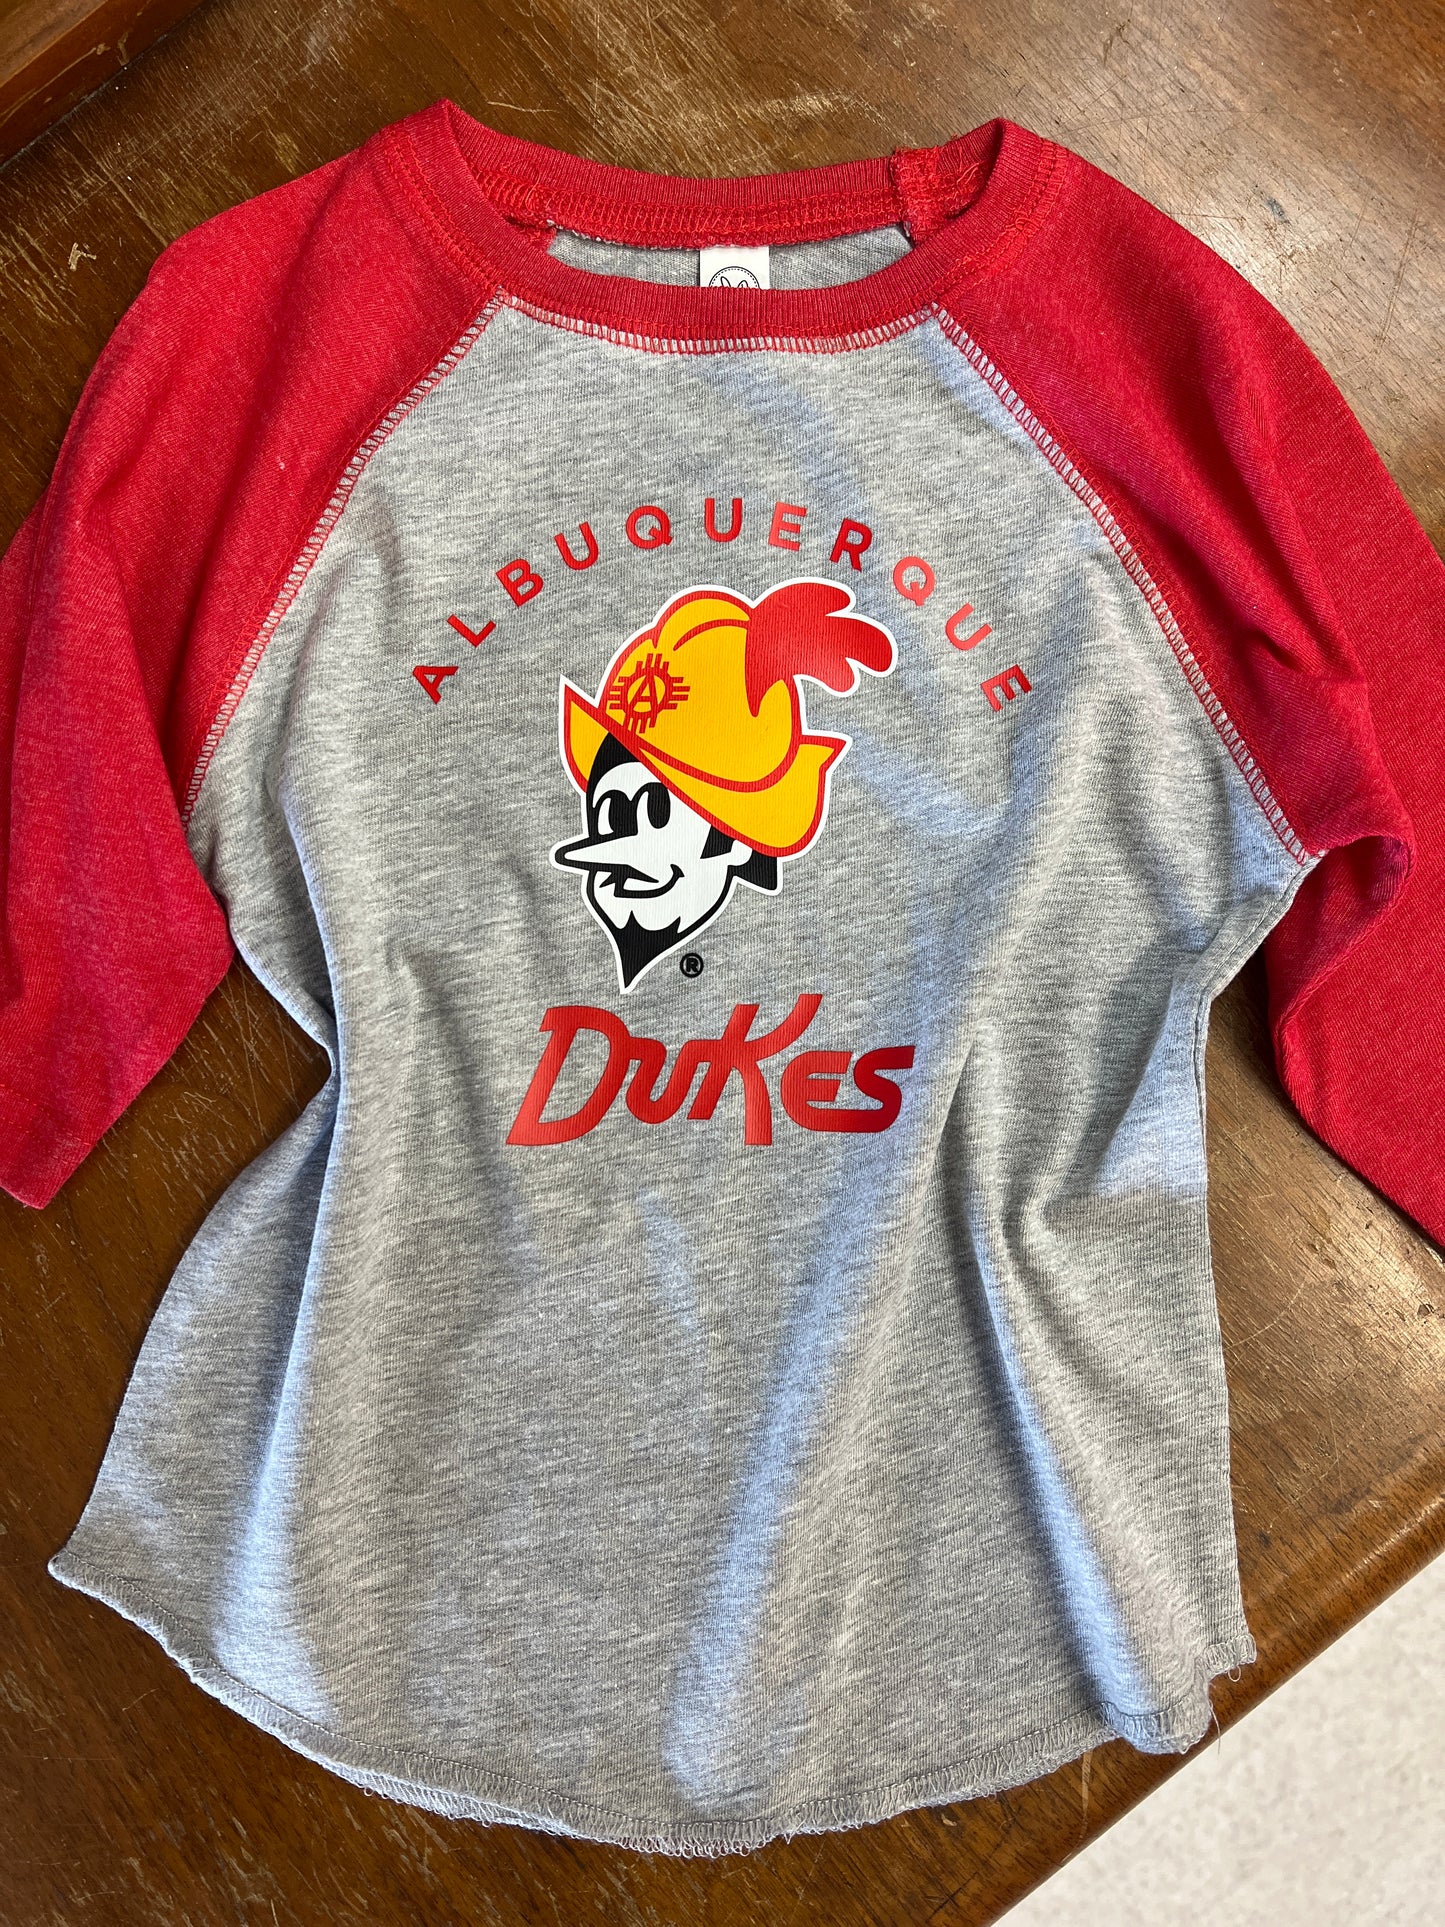 Albuquerque Dukes Toddler Gray with Red Sleeves Tee